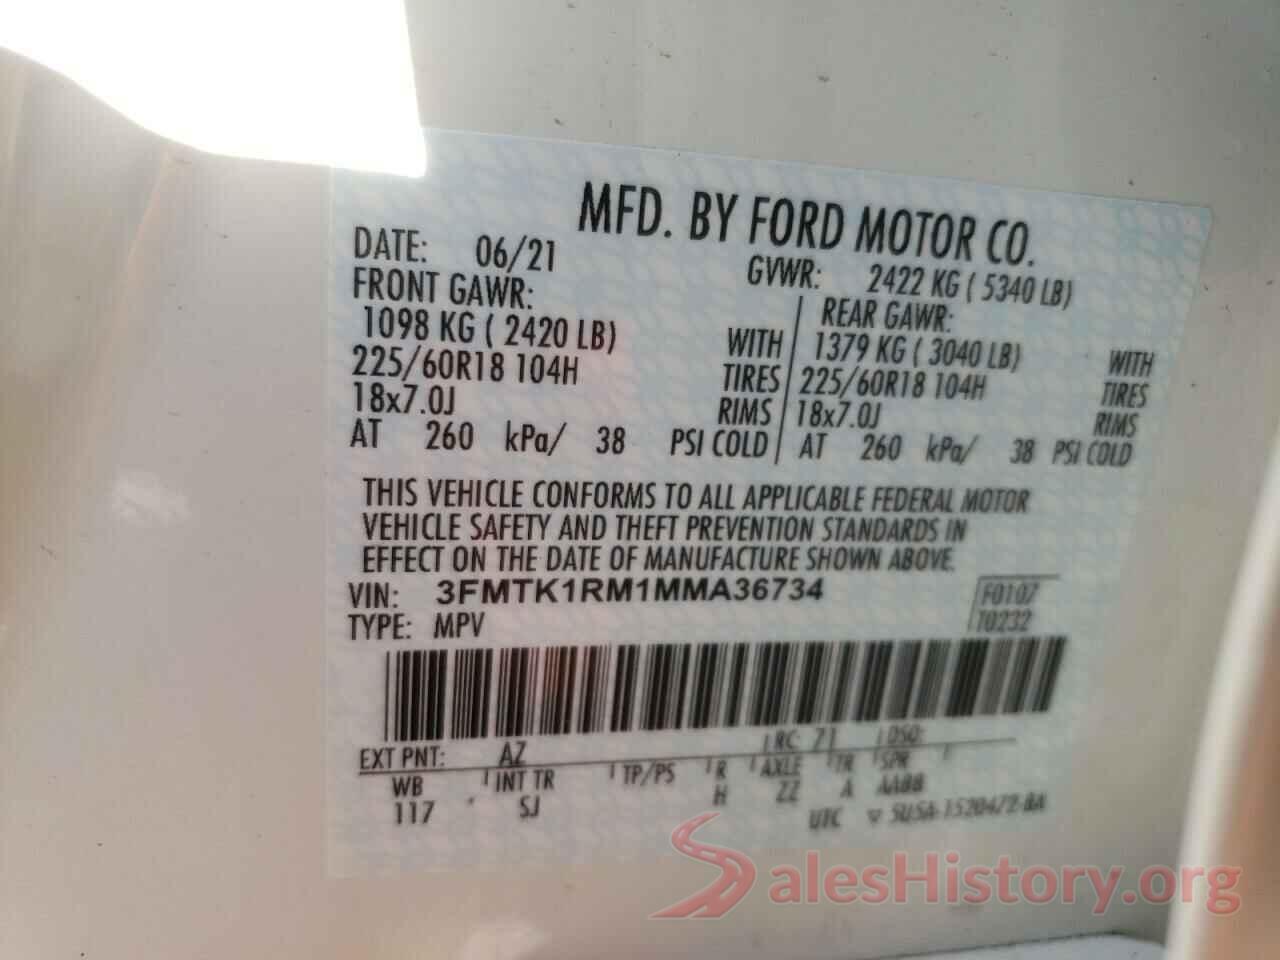 3FMTK1RM1MMA36734 2021 FORD MUSTANG